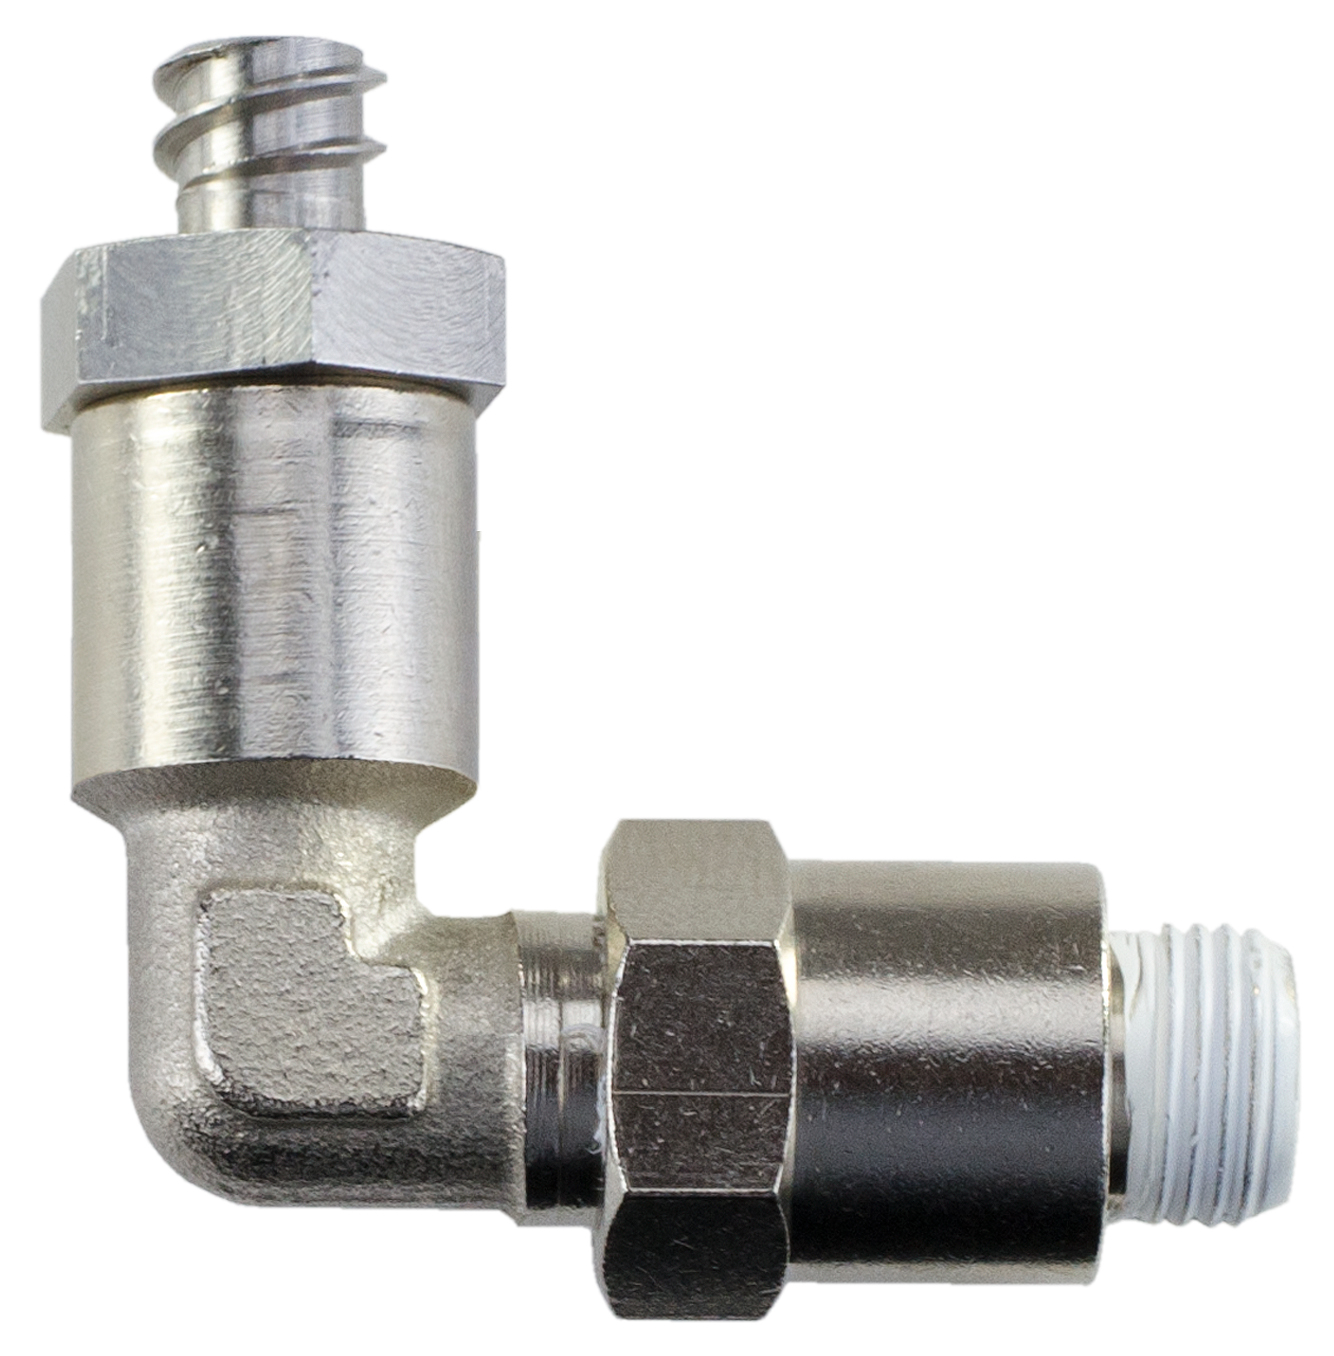 Fitting for cartridge with Luer-Lock on valve